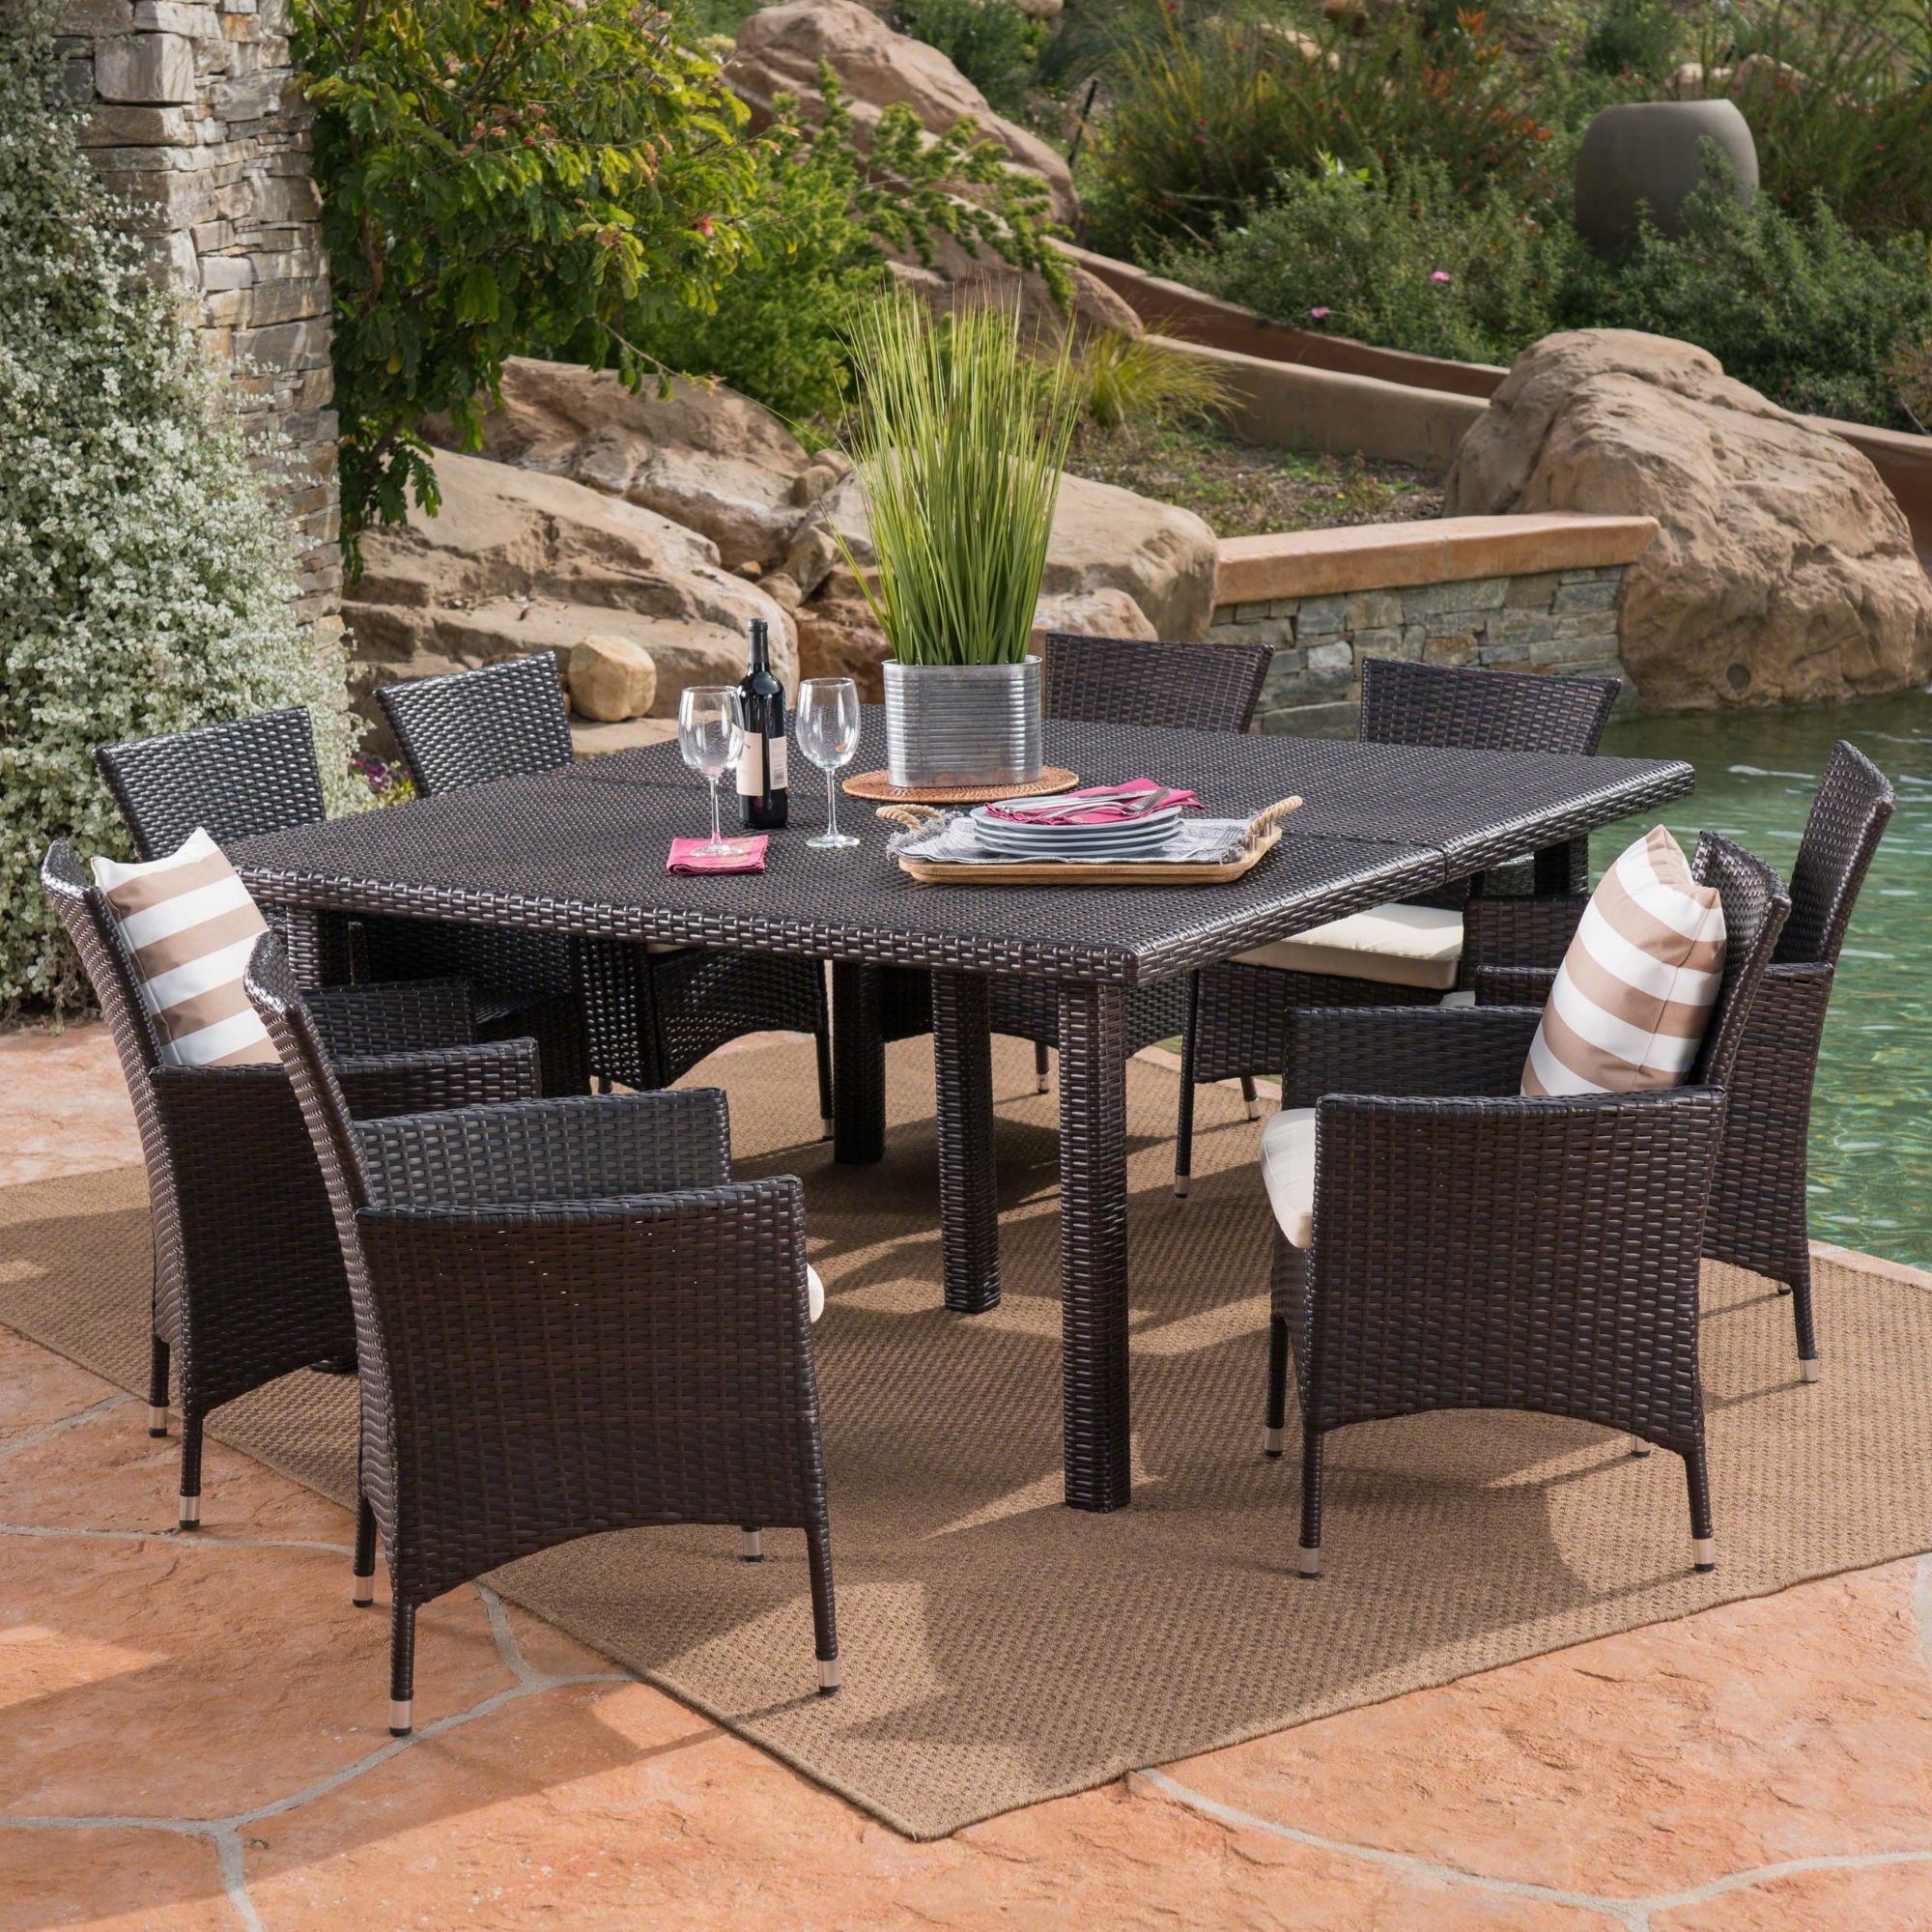 9 Piece Brown Finish Square Wicker Outdoor Furniture Patio Dining Set With 2019 9 Piece Outdoor Square Dining Sets (View 1 of 15)